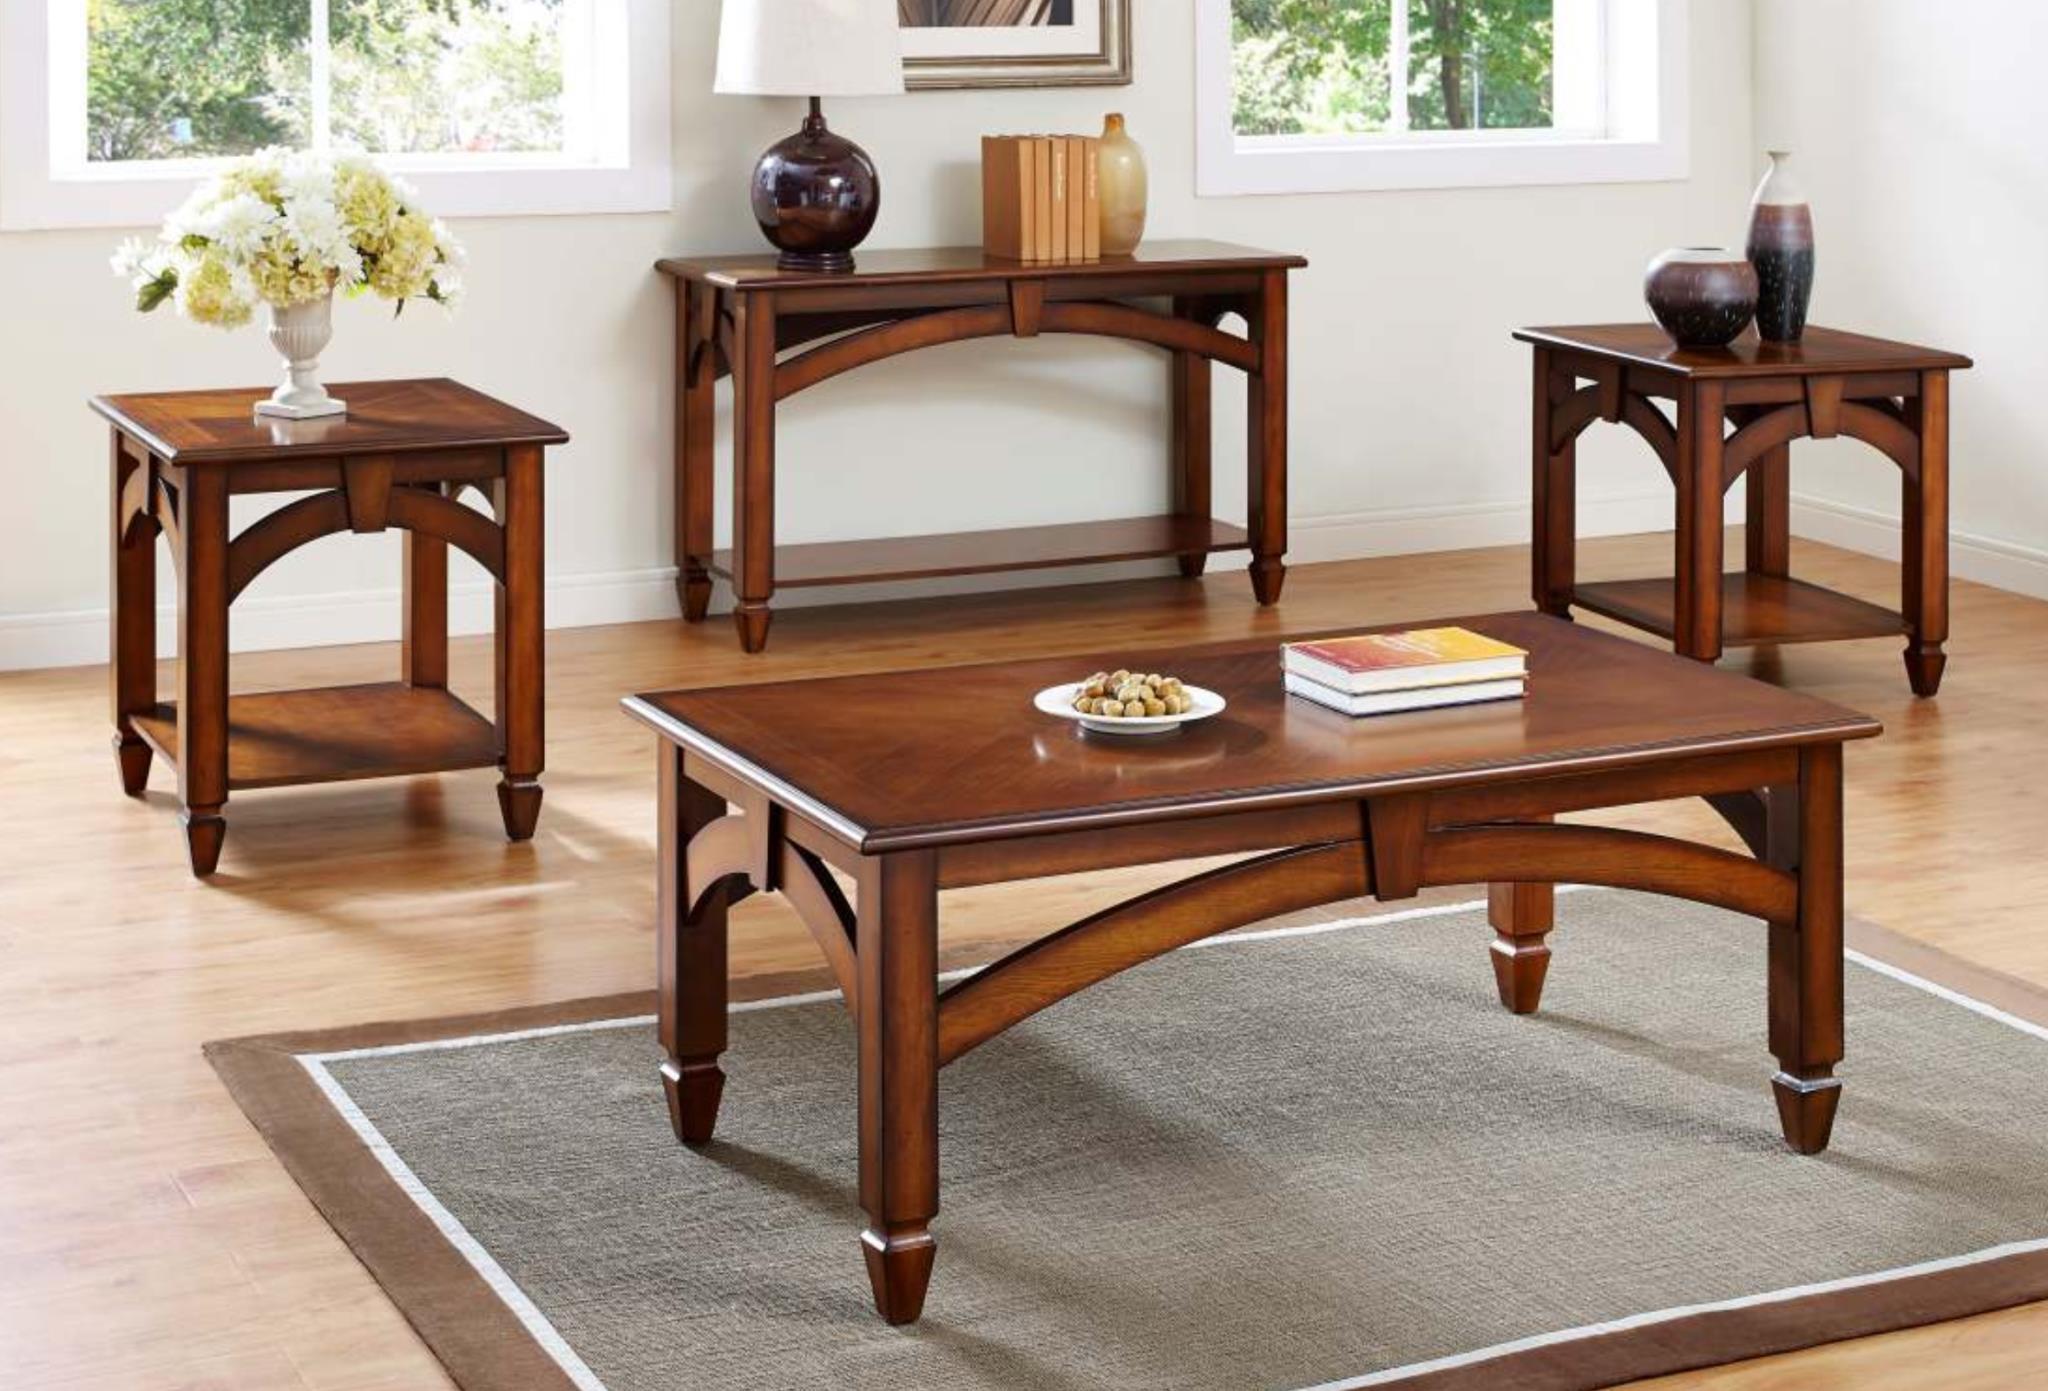 Contemporary, Transitional Coffee Table Set BRENTON 8911-011-Set 8911-011-4pcs in Brown 